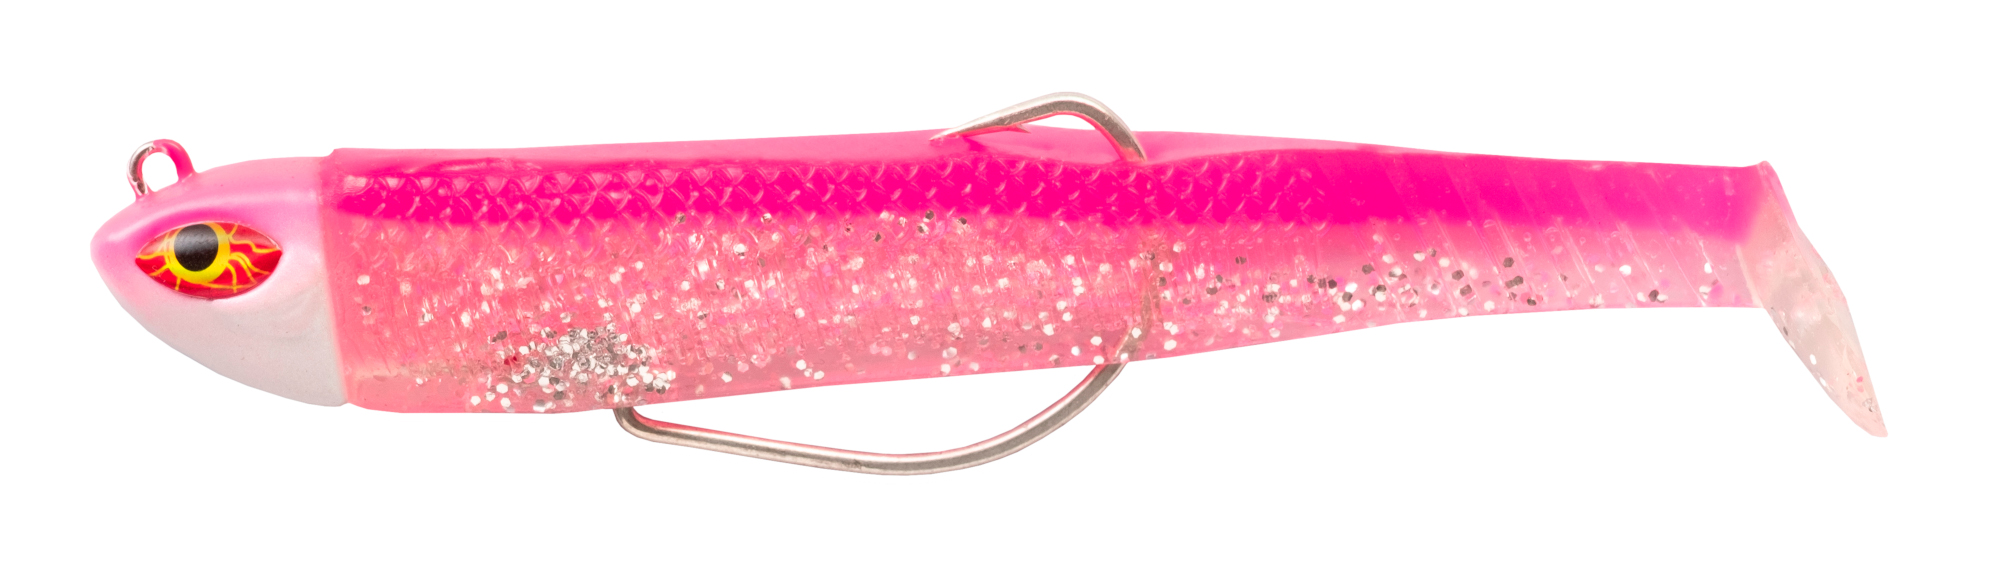 Cinnetic Crafty Candy Shad 17cm (125g) (2 pcs) - Electric Pink